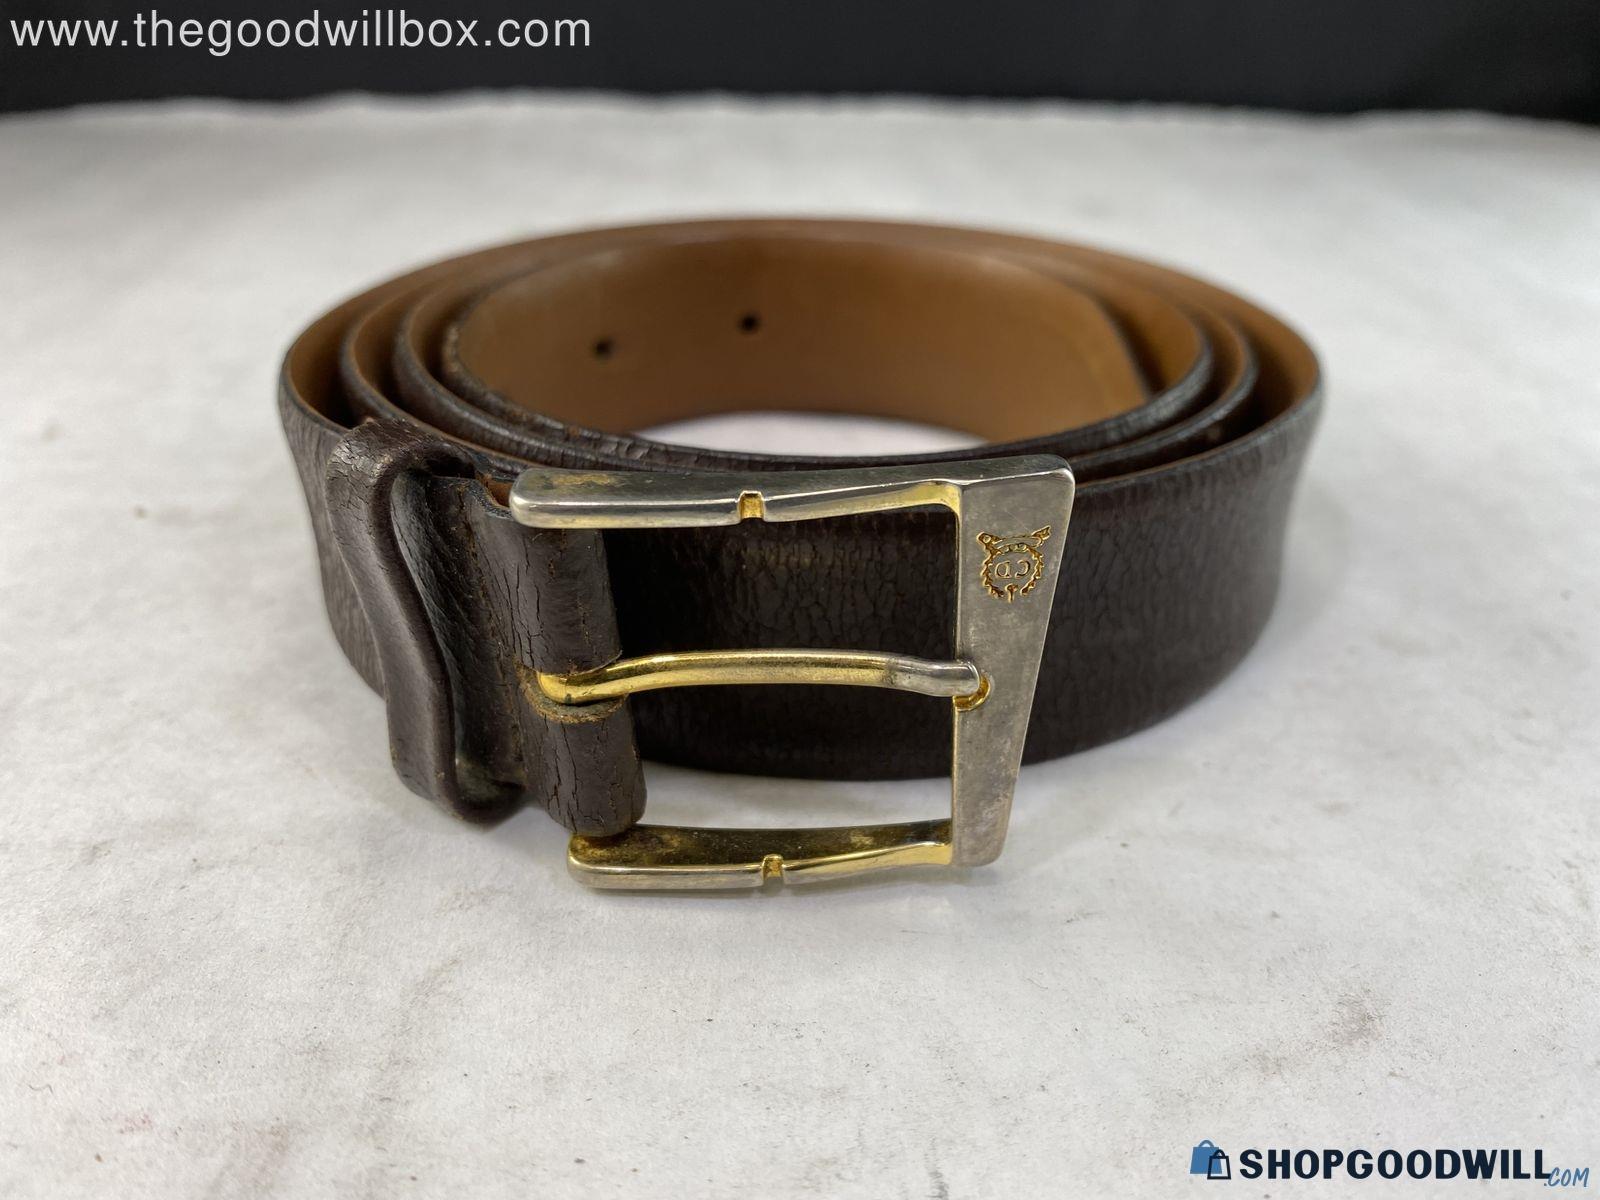 Authentic Christian Dior Leather Belt - shopgoodwill.com